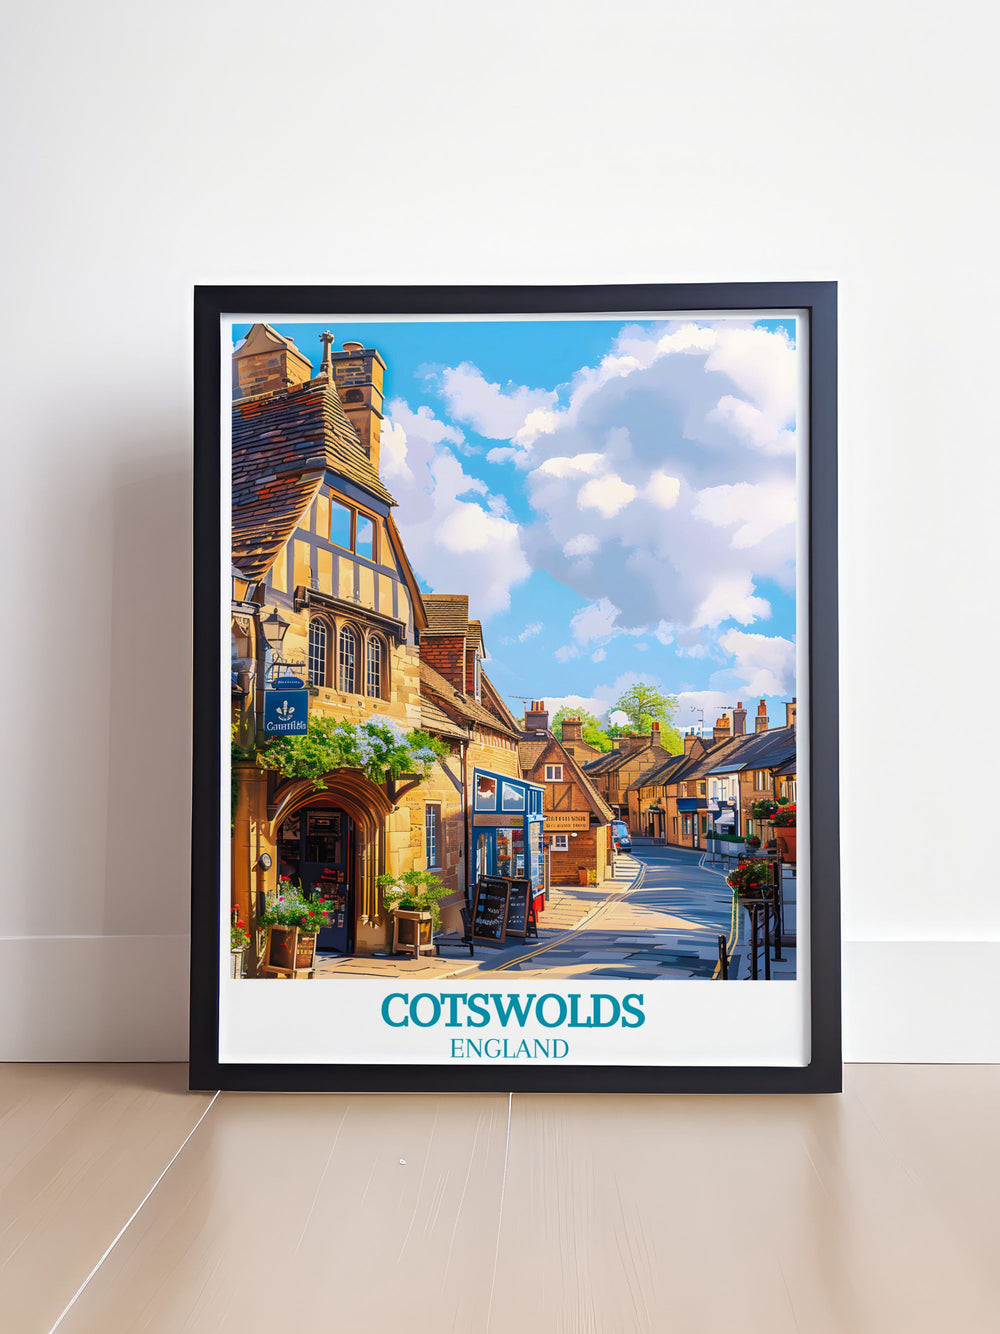 Bring the essence of the Cotswolds into your home with this beautiful travel poster of Chipping Campden, showcasing its serene landscapes and charming village scenes, perfect for adding a touch of rural elegance.